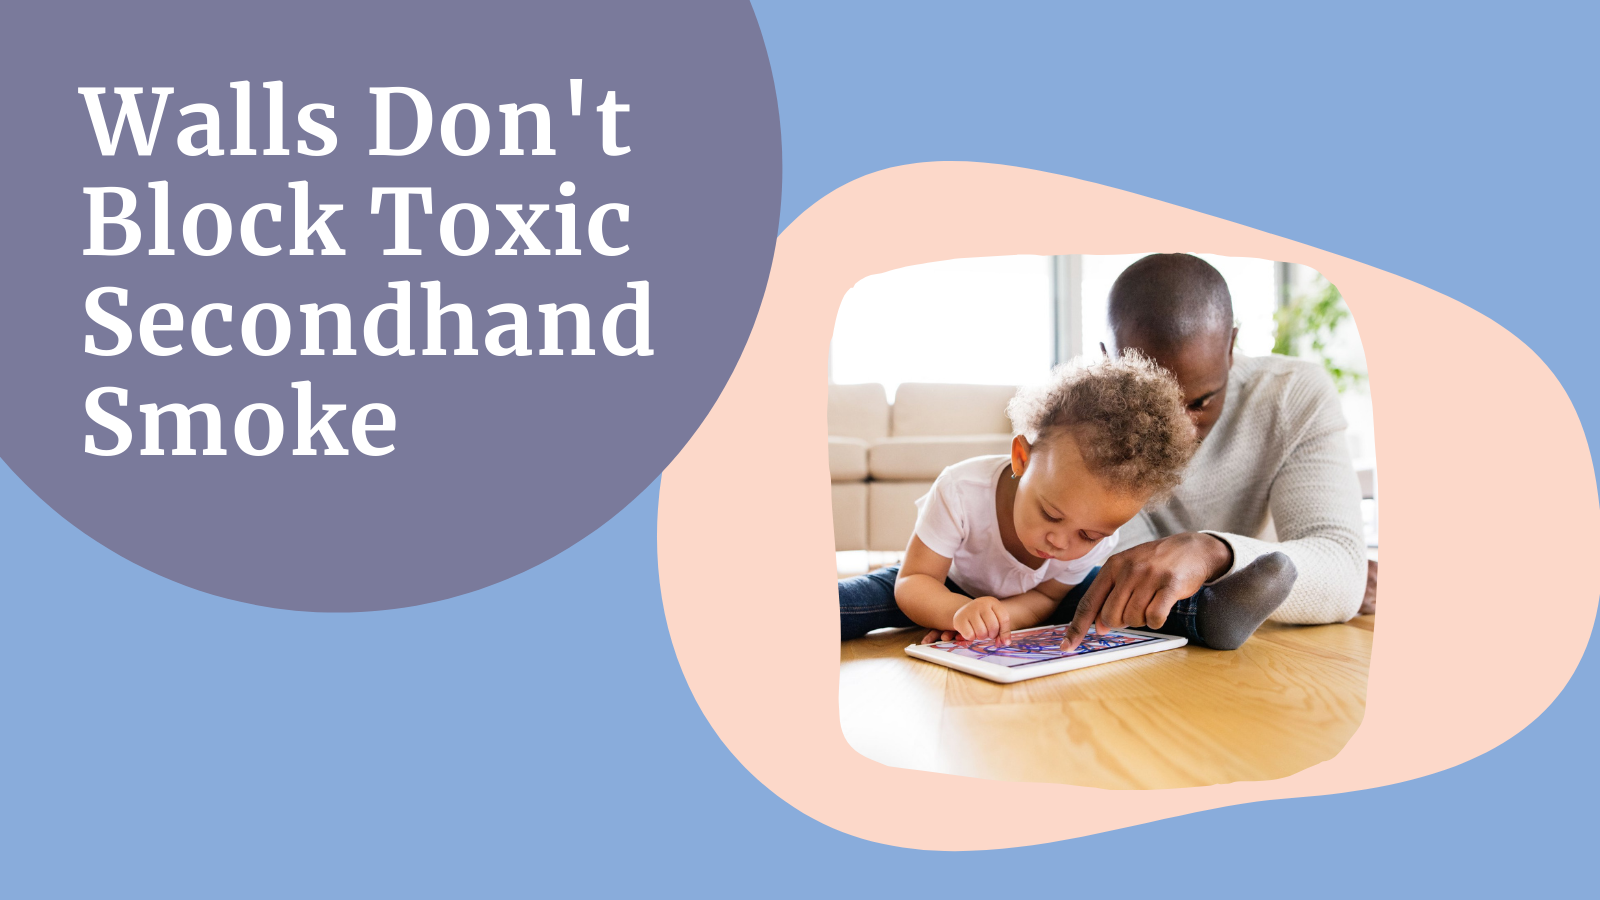 The words 'Walls Don't Block Toxic Secondhand Smoke' over a photo of a father and toddler drawing on a tablet.